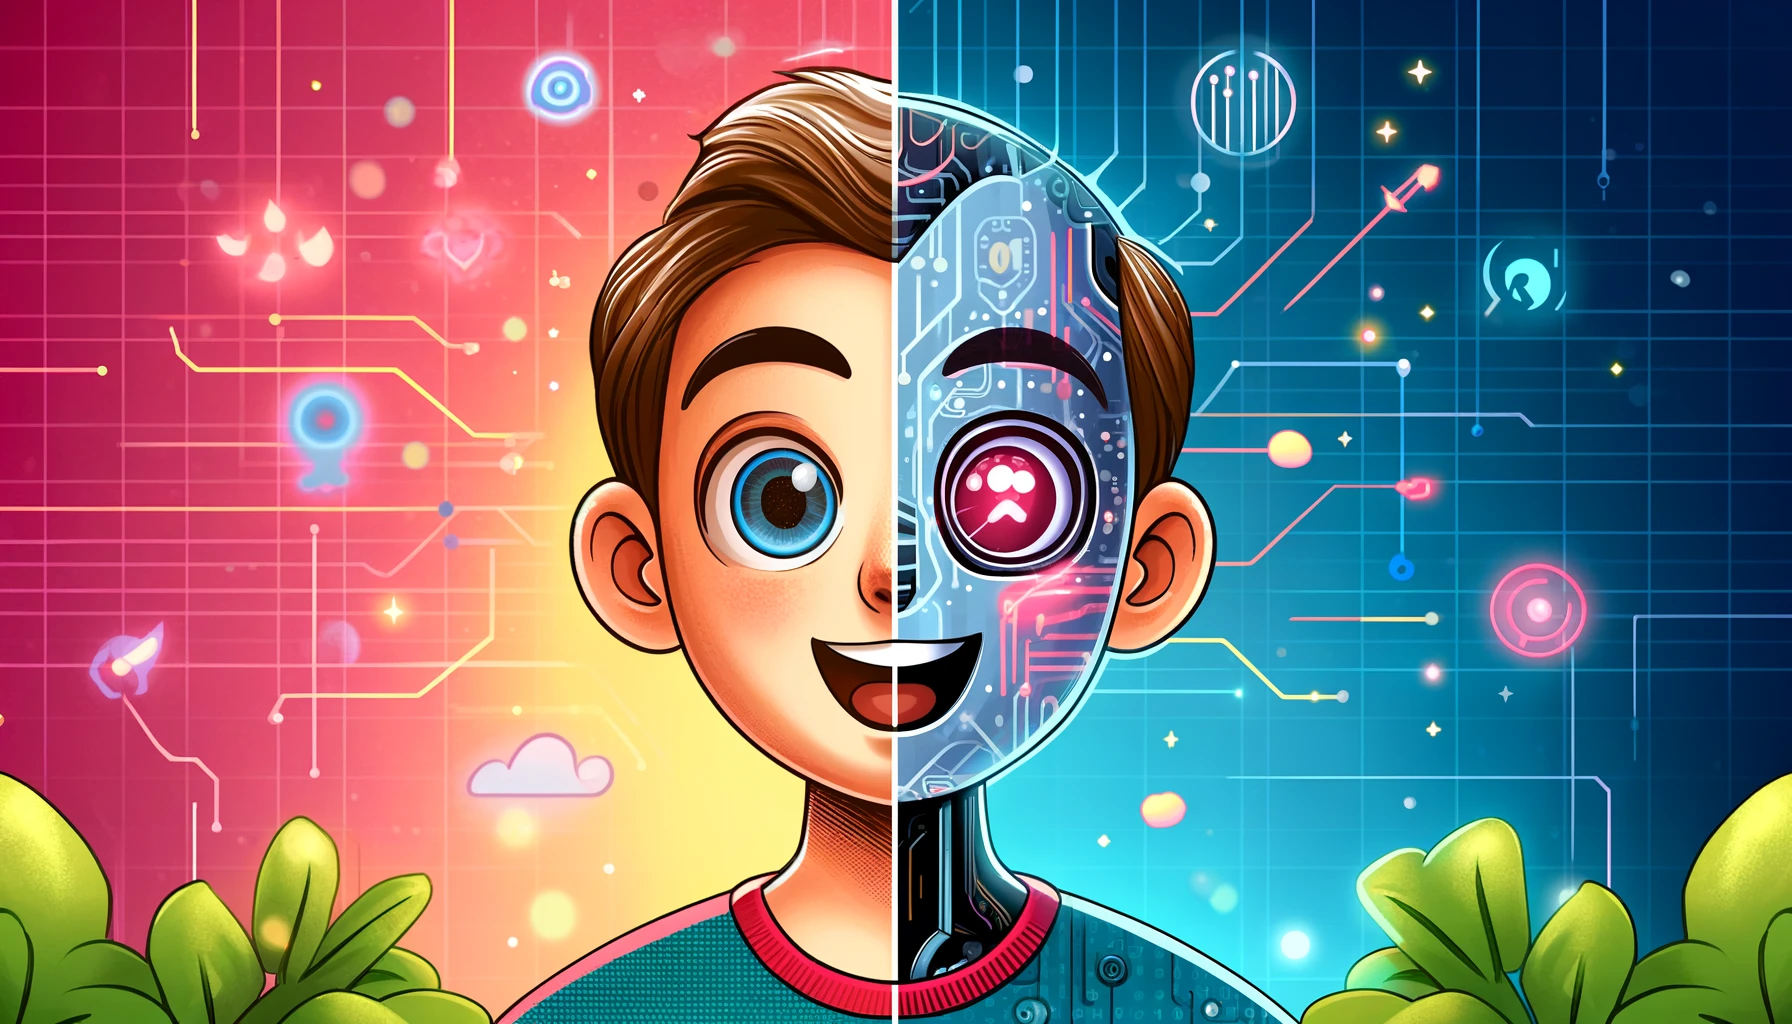 A horizontal image depicting a cartoon character morphing into an AI. One half of the cartoon character's face is animated, while the other half transitions into a digital or robotic form, with circuit patterns, digital effects, and glowing lines emphasizing the transformation. The background is playful and futuristic, blending the whimsical nature of the cartoon with the advanced aspects of AI technology.